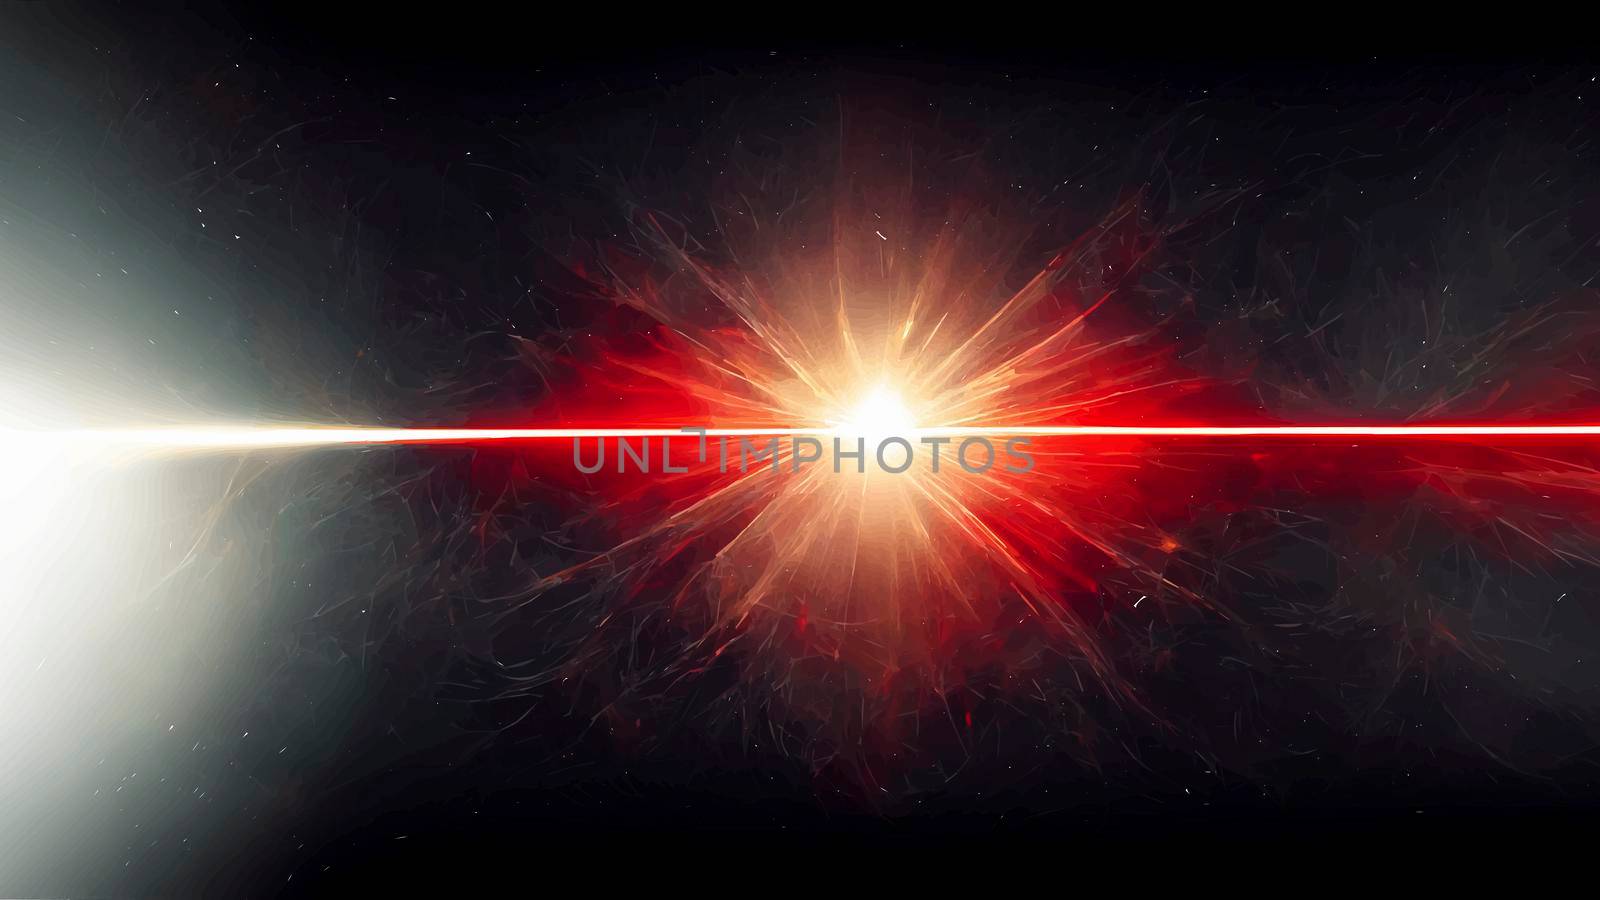 Red Light Lens flare on black background. Light Lens flare on black background. Lens flare with bright light isolated with a black background. Used for textures and materials.